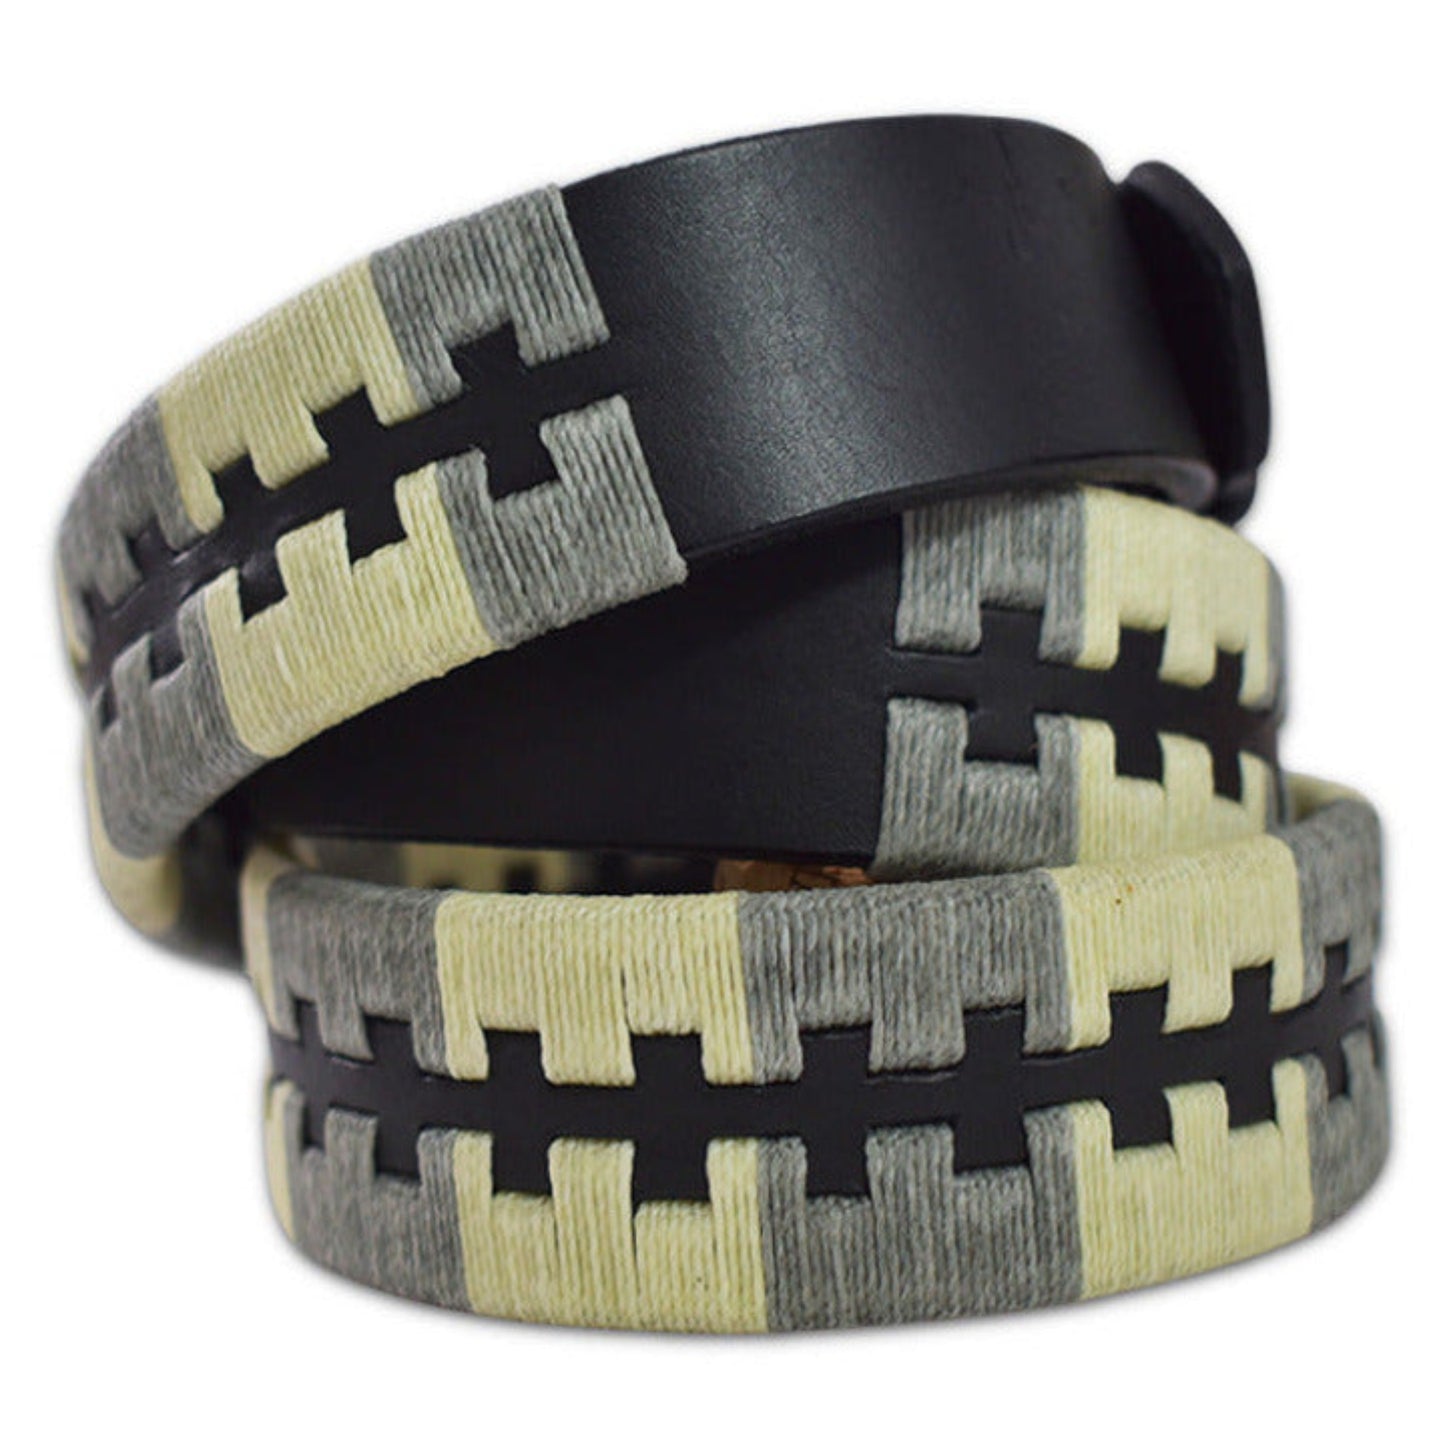  black argentina polo belt in comb pattern